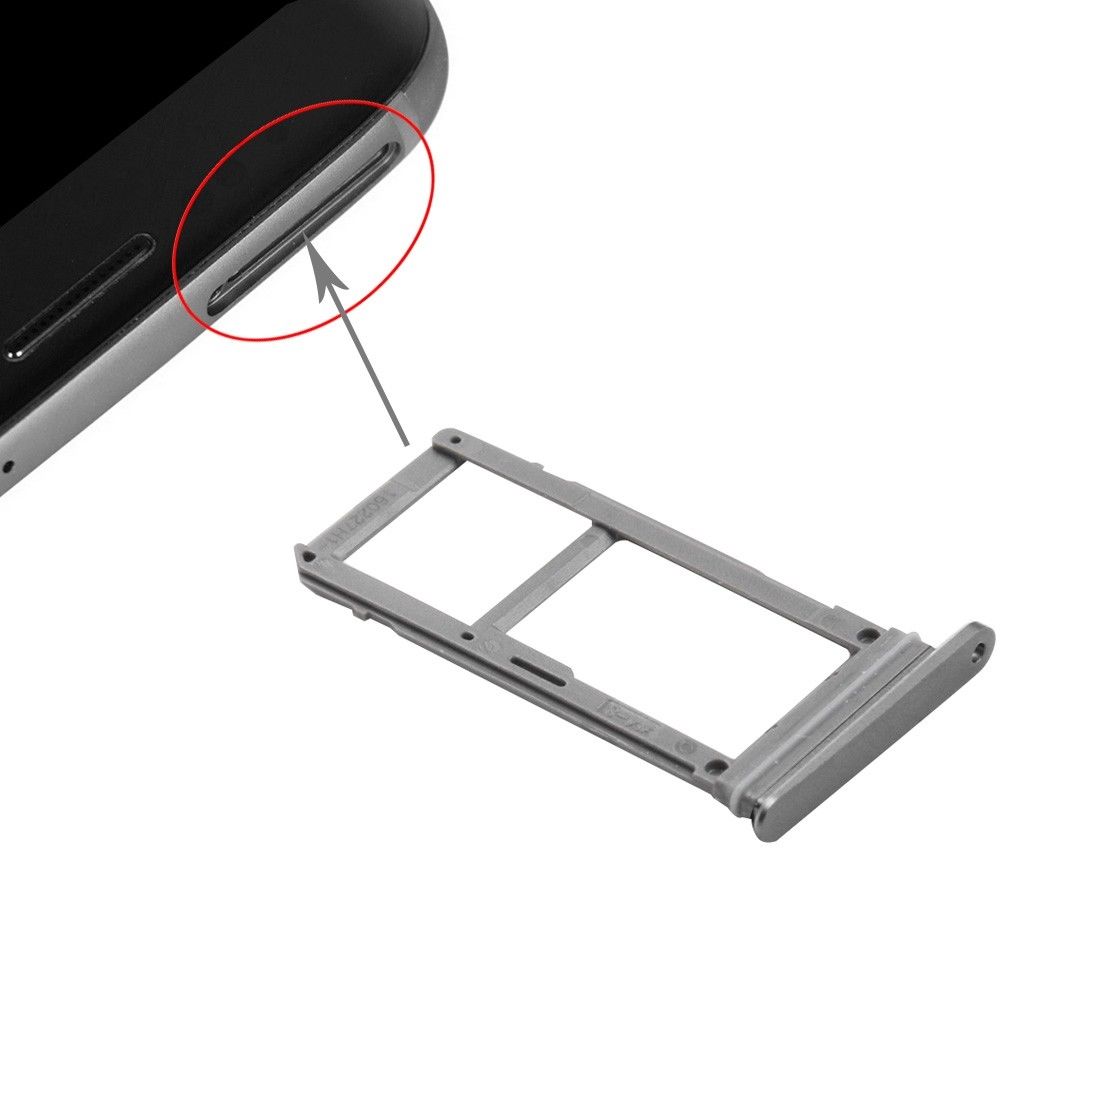 Samsung Galaxy S7 Micro SD & Nano SIM Card Tray Holder - Grey for [product_price] - First Help Tech